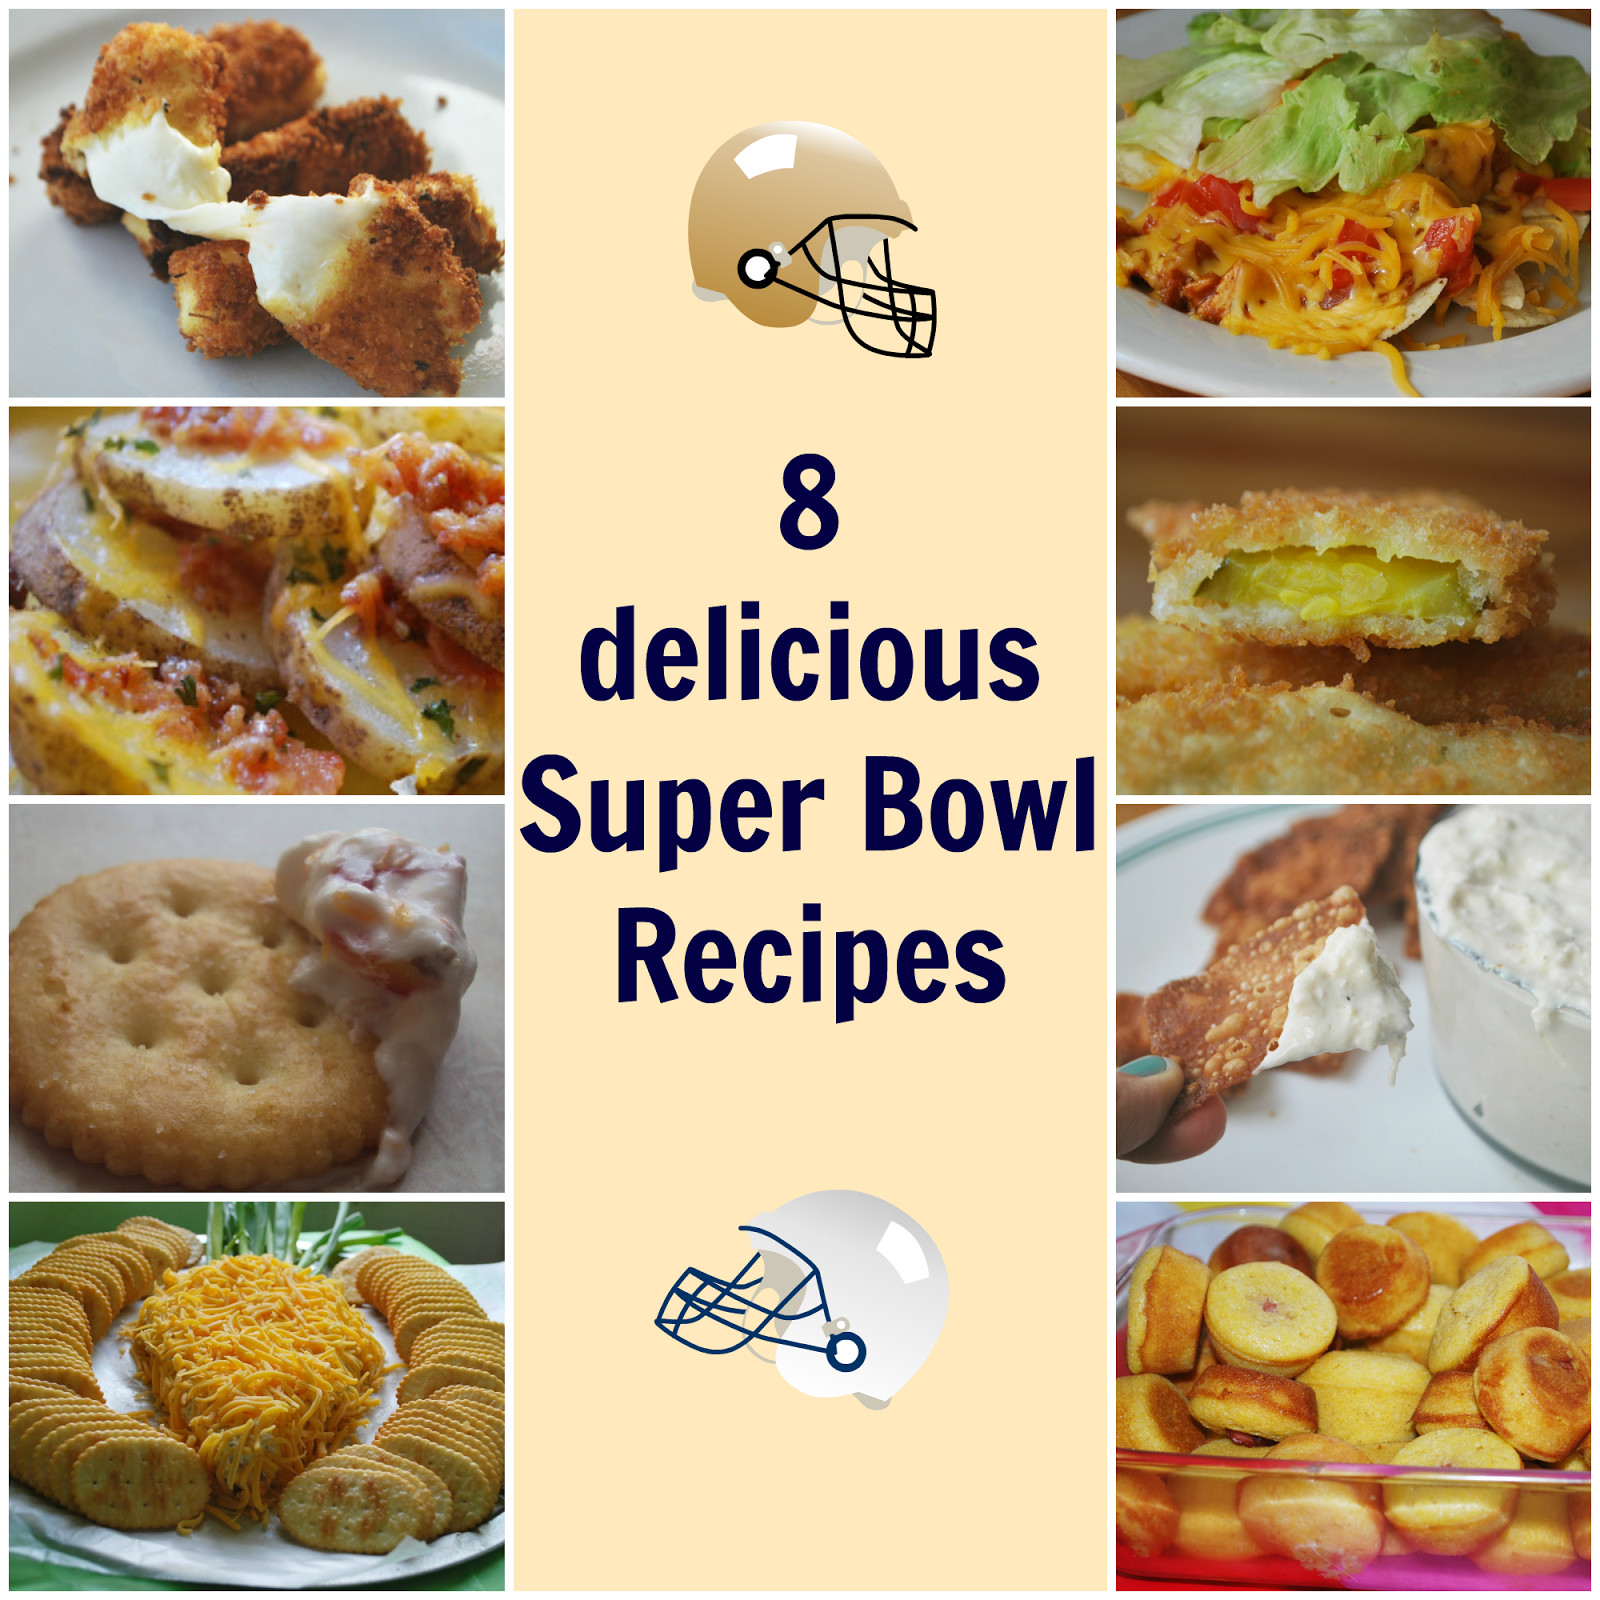 Tasty Super Bowl Recipes
 A Chick Who Can Cook 8 delicious super bowl recipes